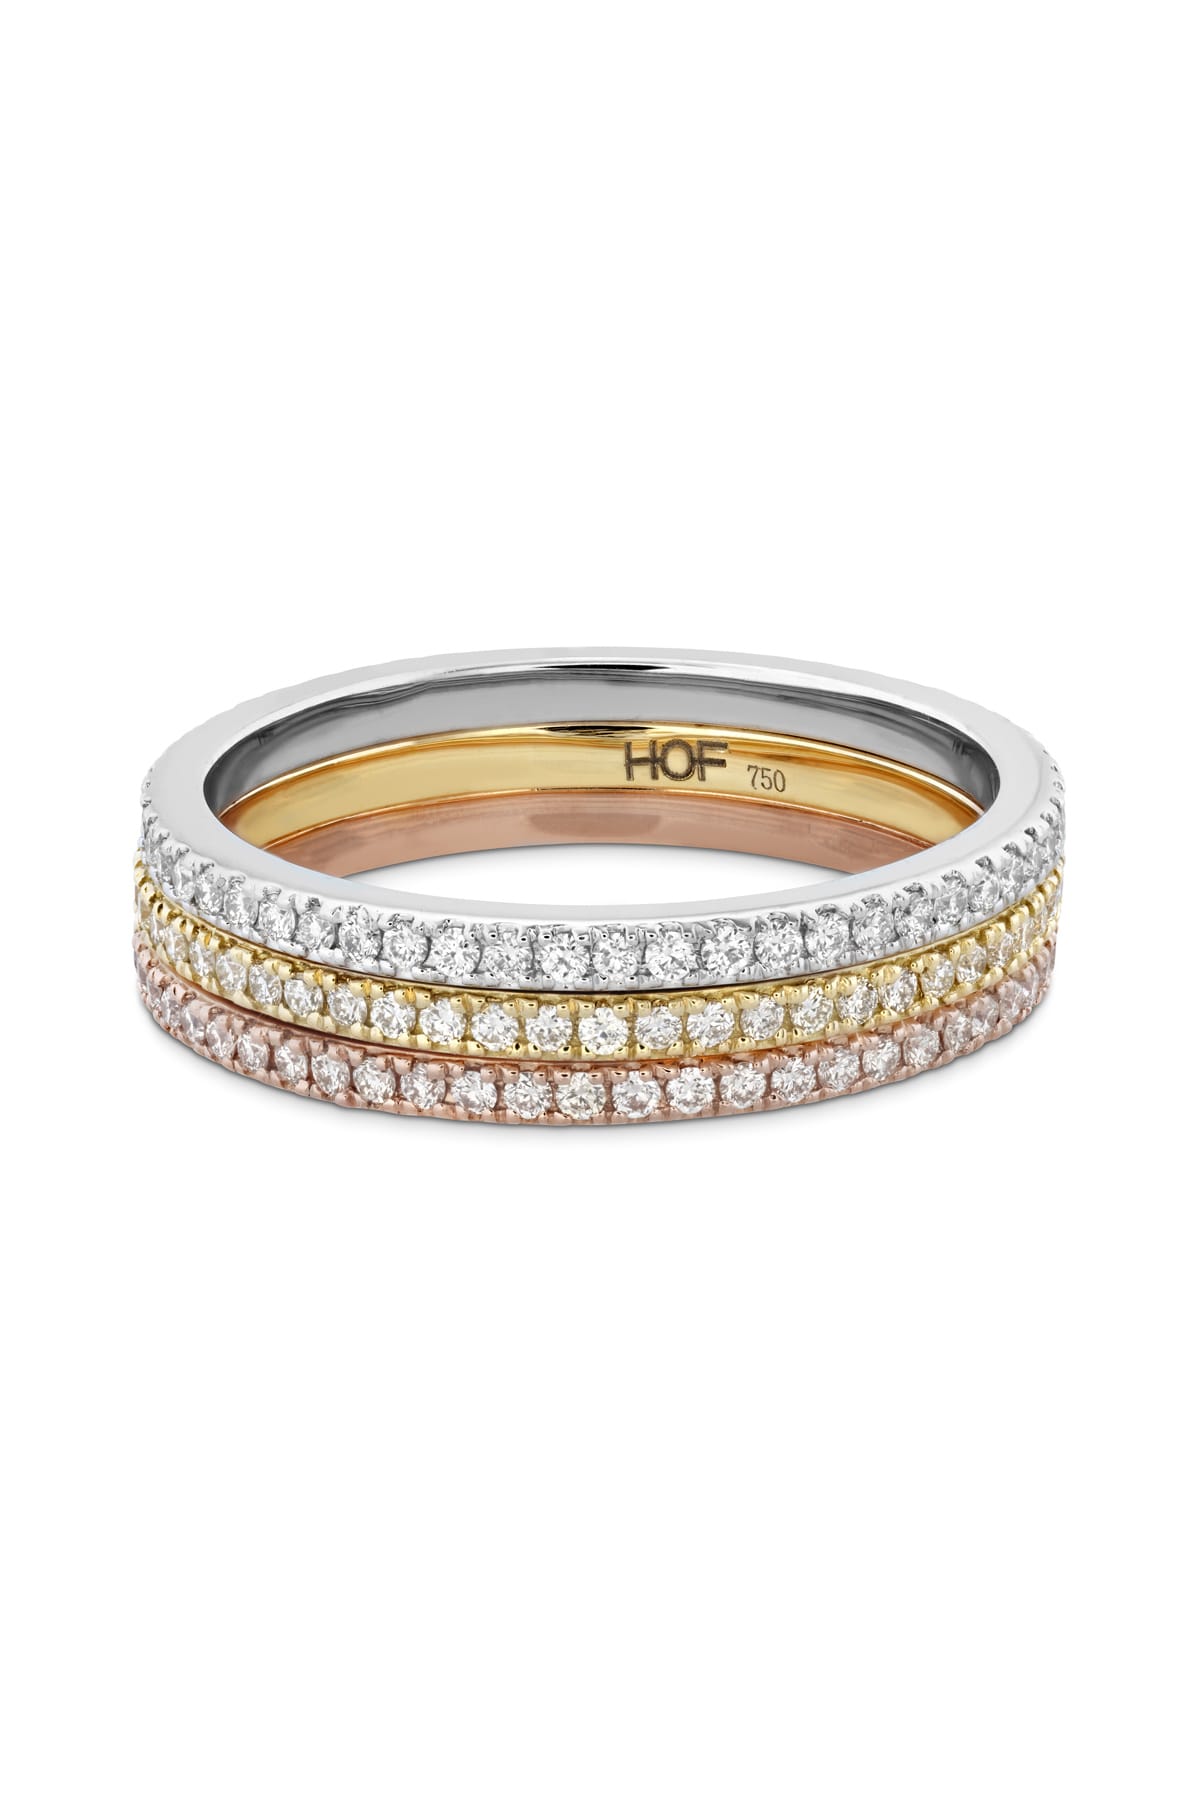 Classic Eternity Band From Hearts On Fire available at LeGassick Diamonds and Jewellery Gold Coast, Australia.